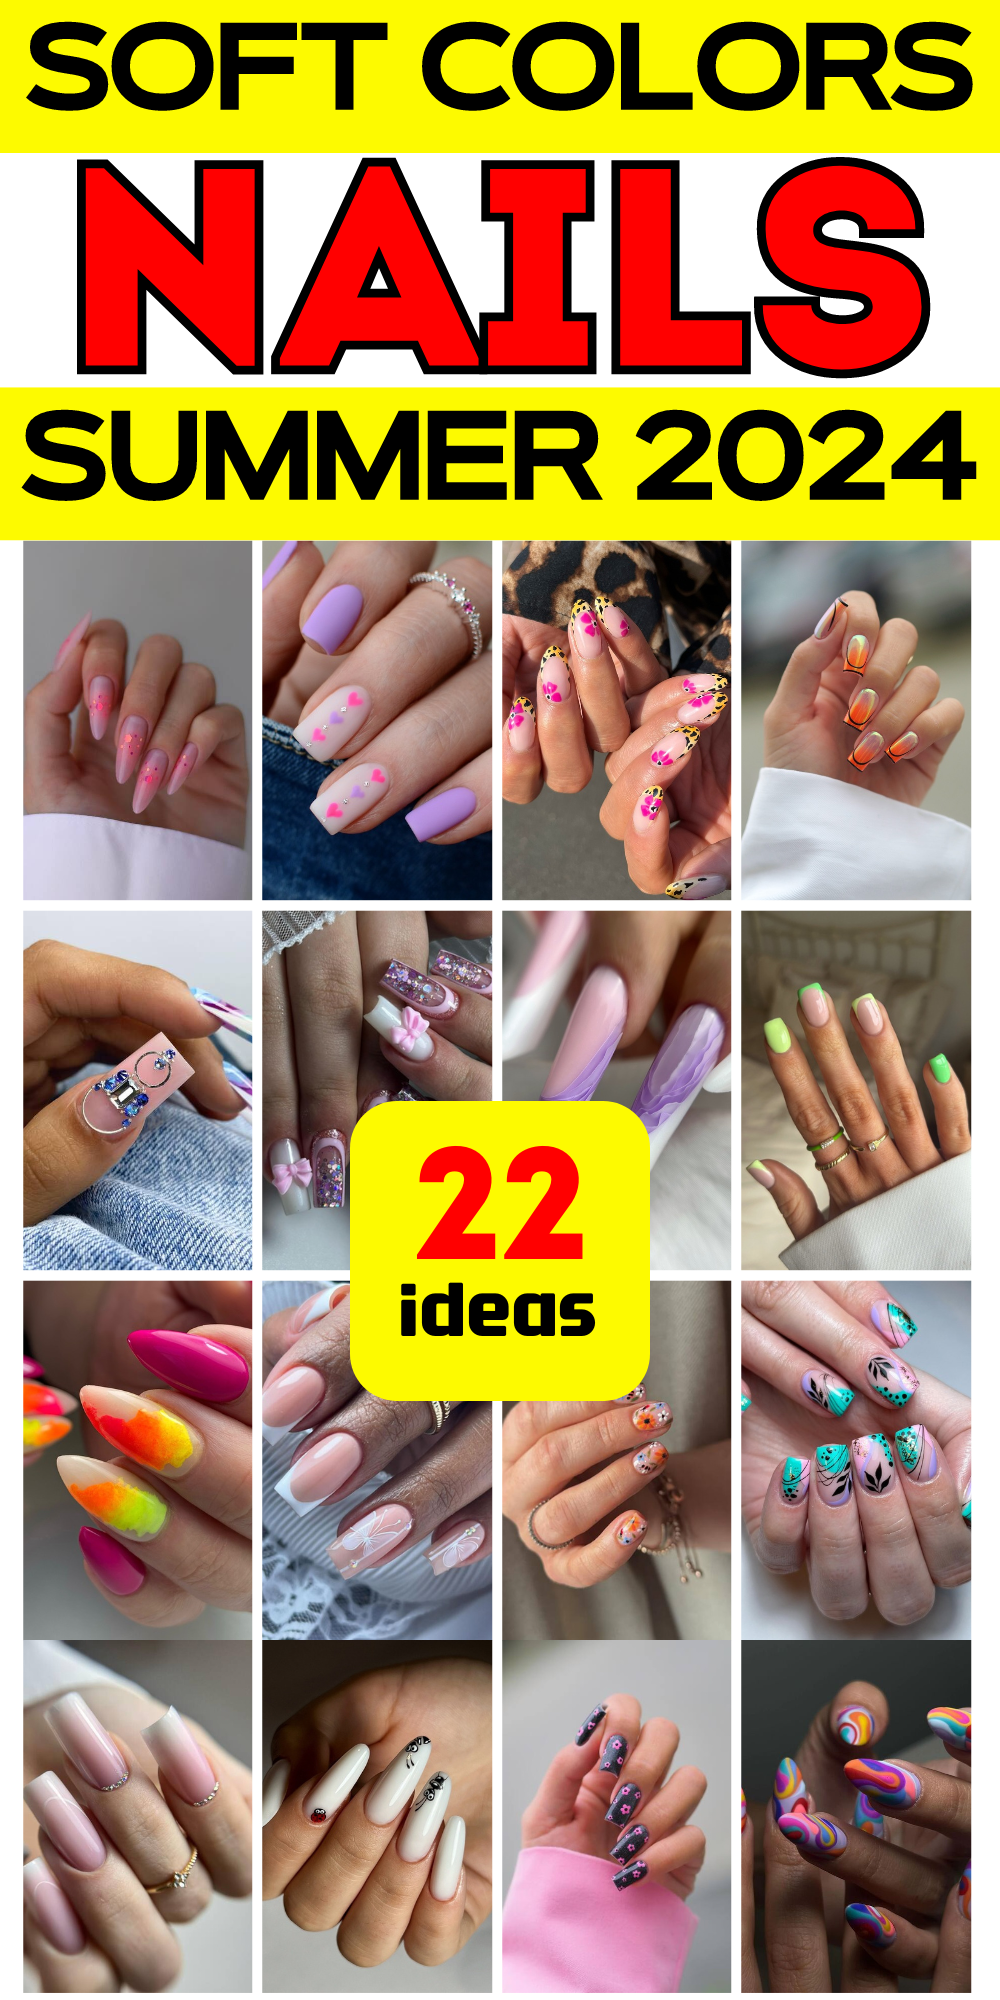 22 Stunning Soft Summer Nail Colors and Designs for a Chic Season Look